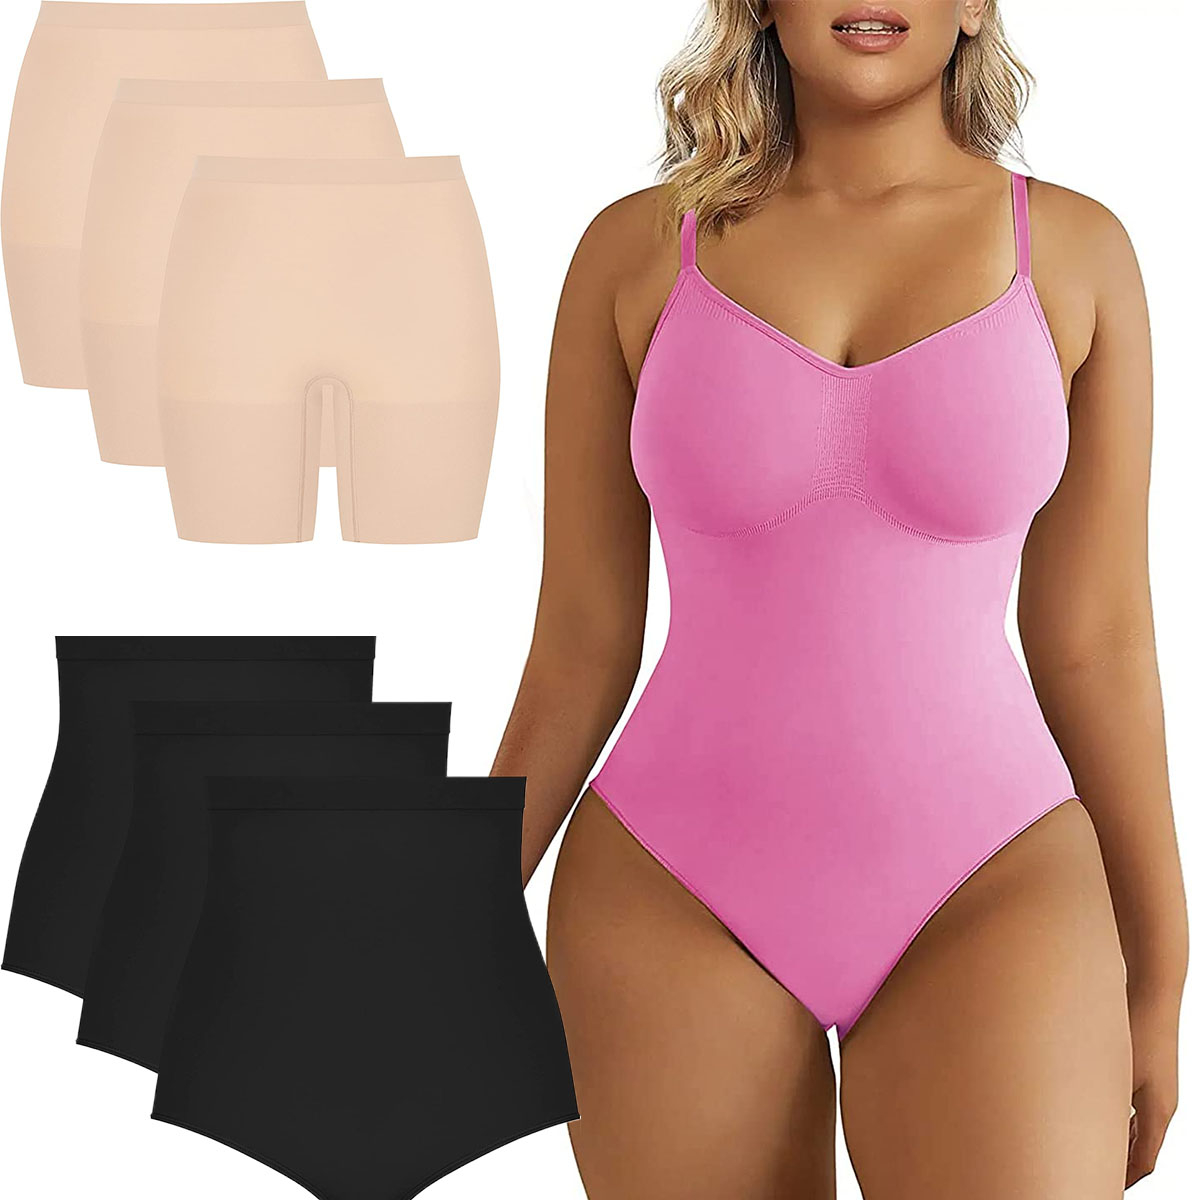 Highlight your curves even more with premium shapewear. Radiate